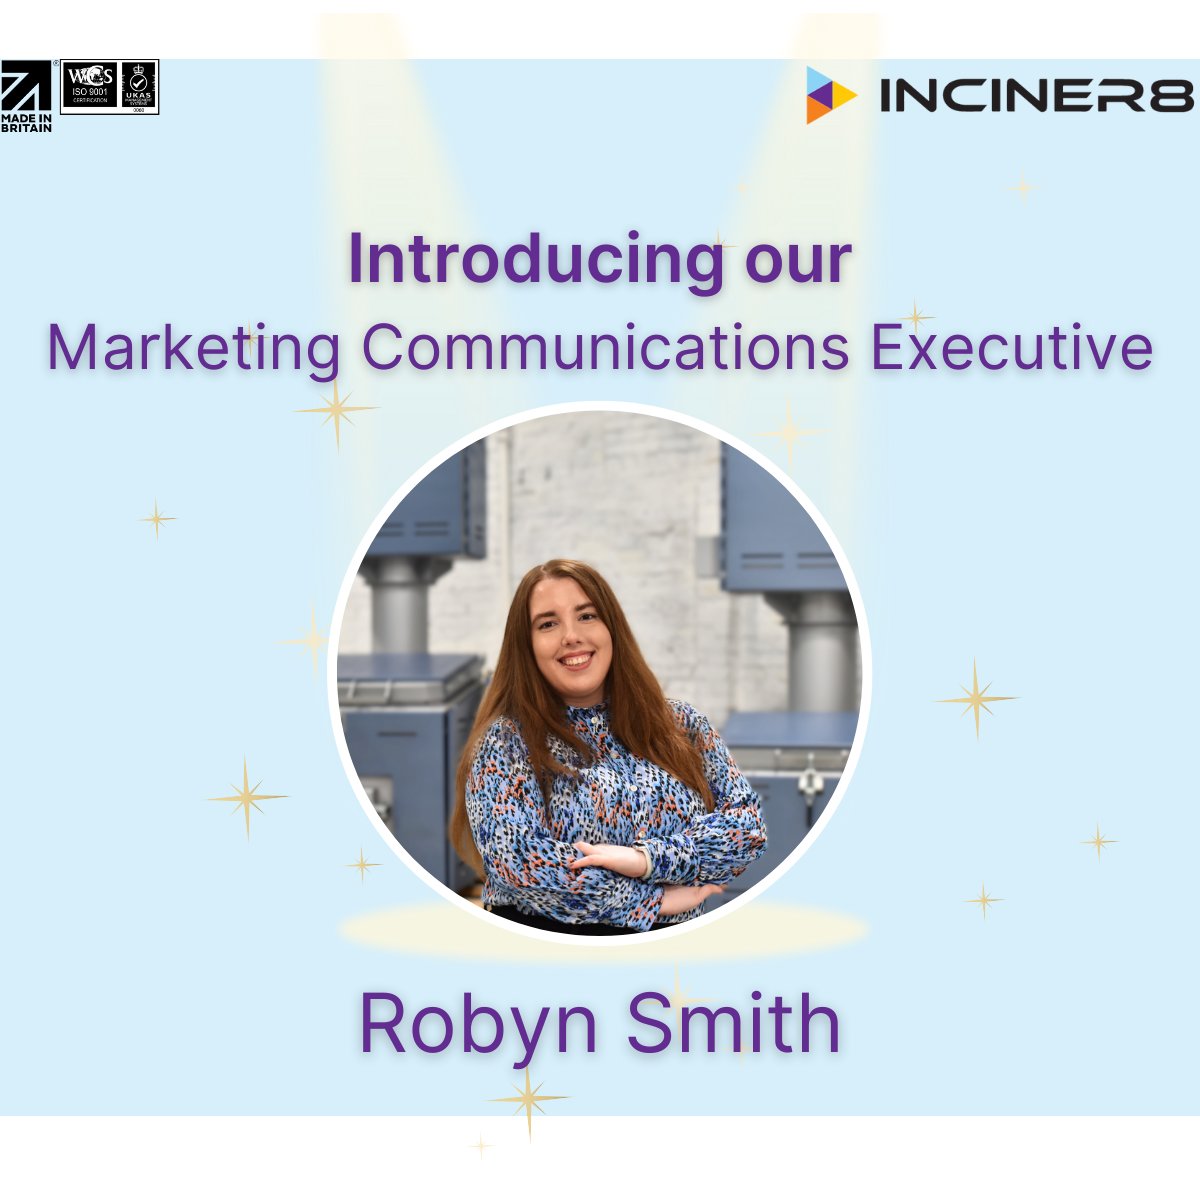 ✨Meet Robyn, our Marketing Communications Executive✨

“Collaborating with my talented colleagues, who have warmly welcomed me into the team, has been a privilege, and their expertise in their respective fields inspires me daily.'

Welcome aboard, Robyn!